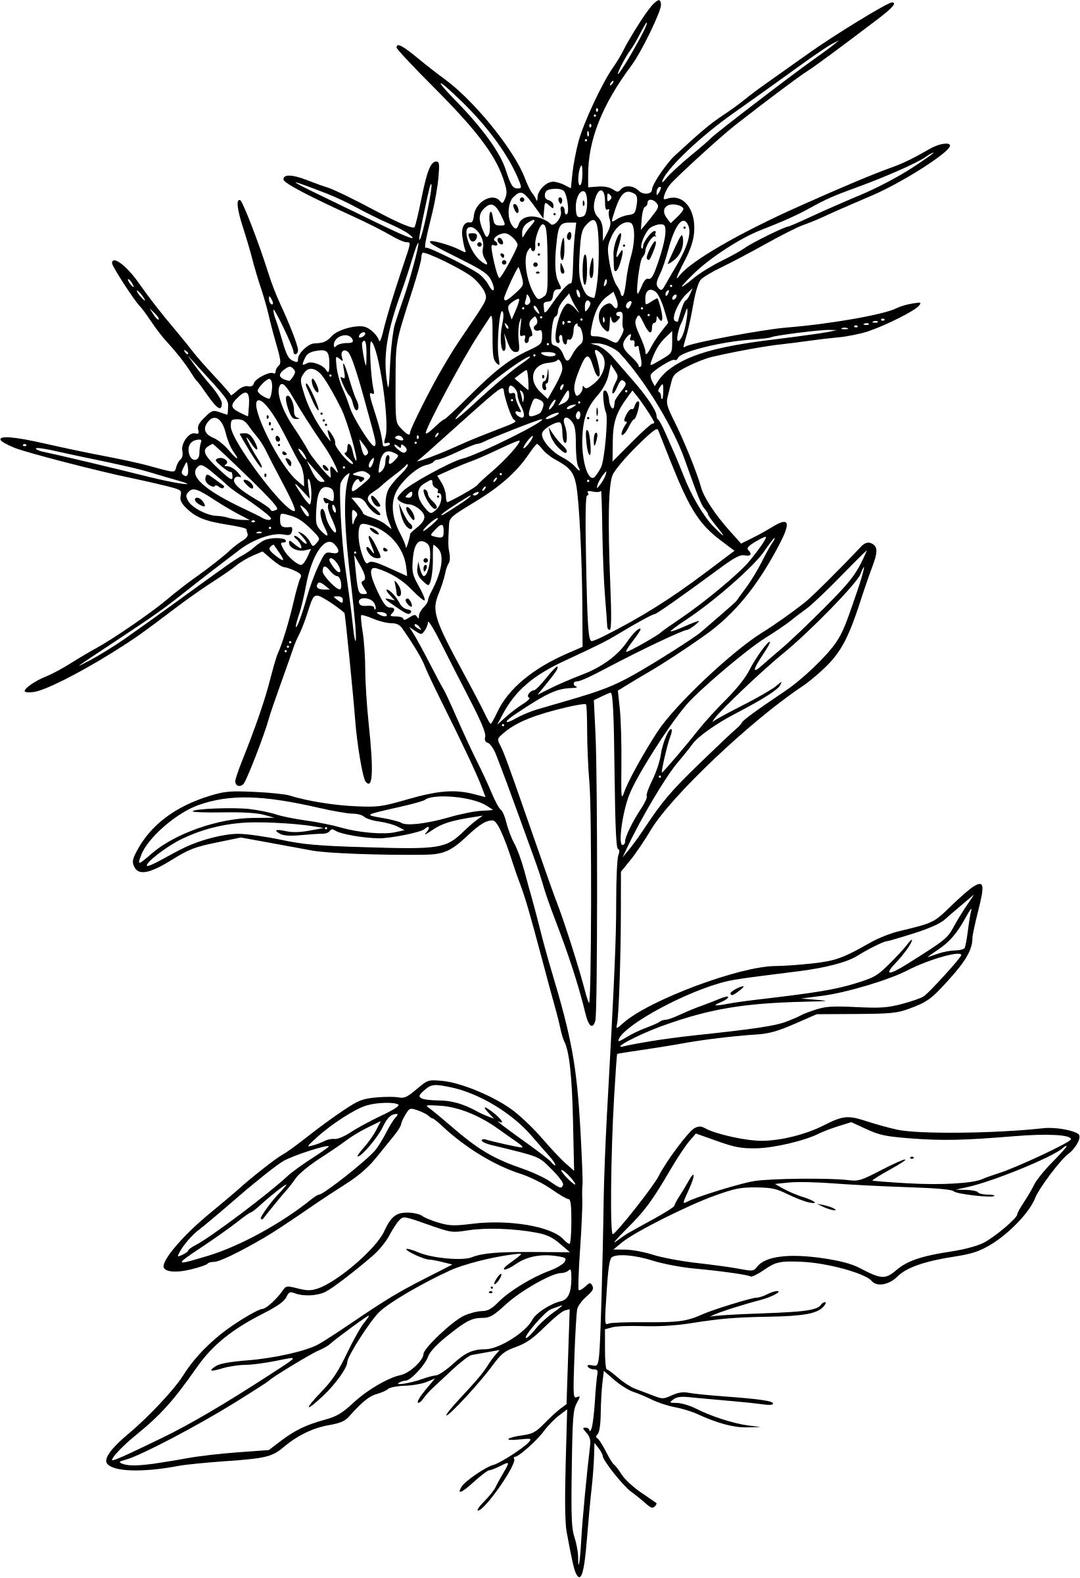 Yellow star thistle png transparent